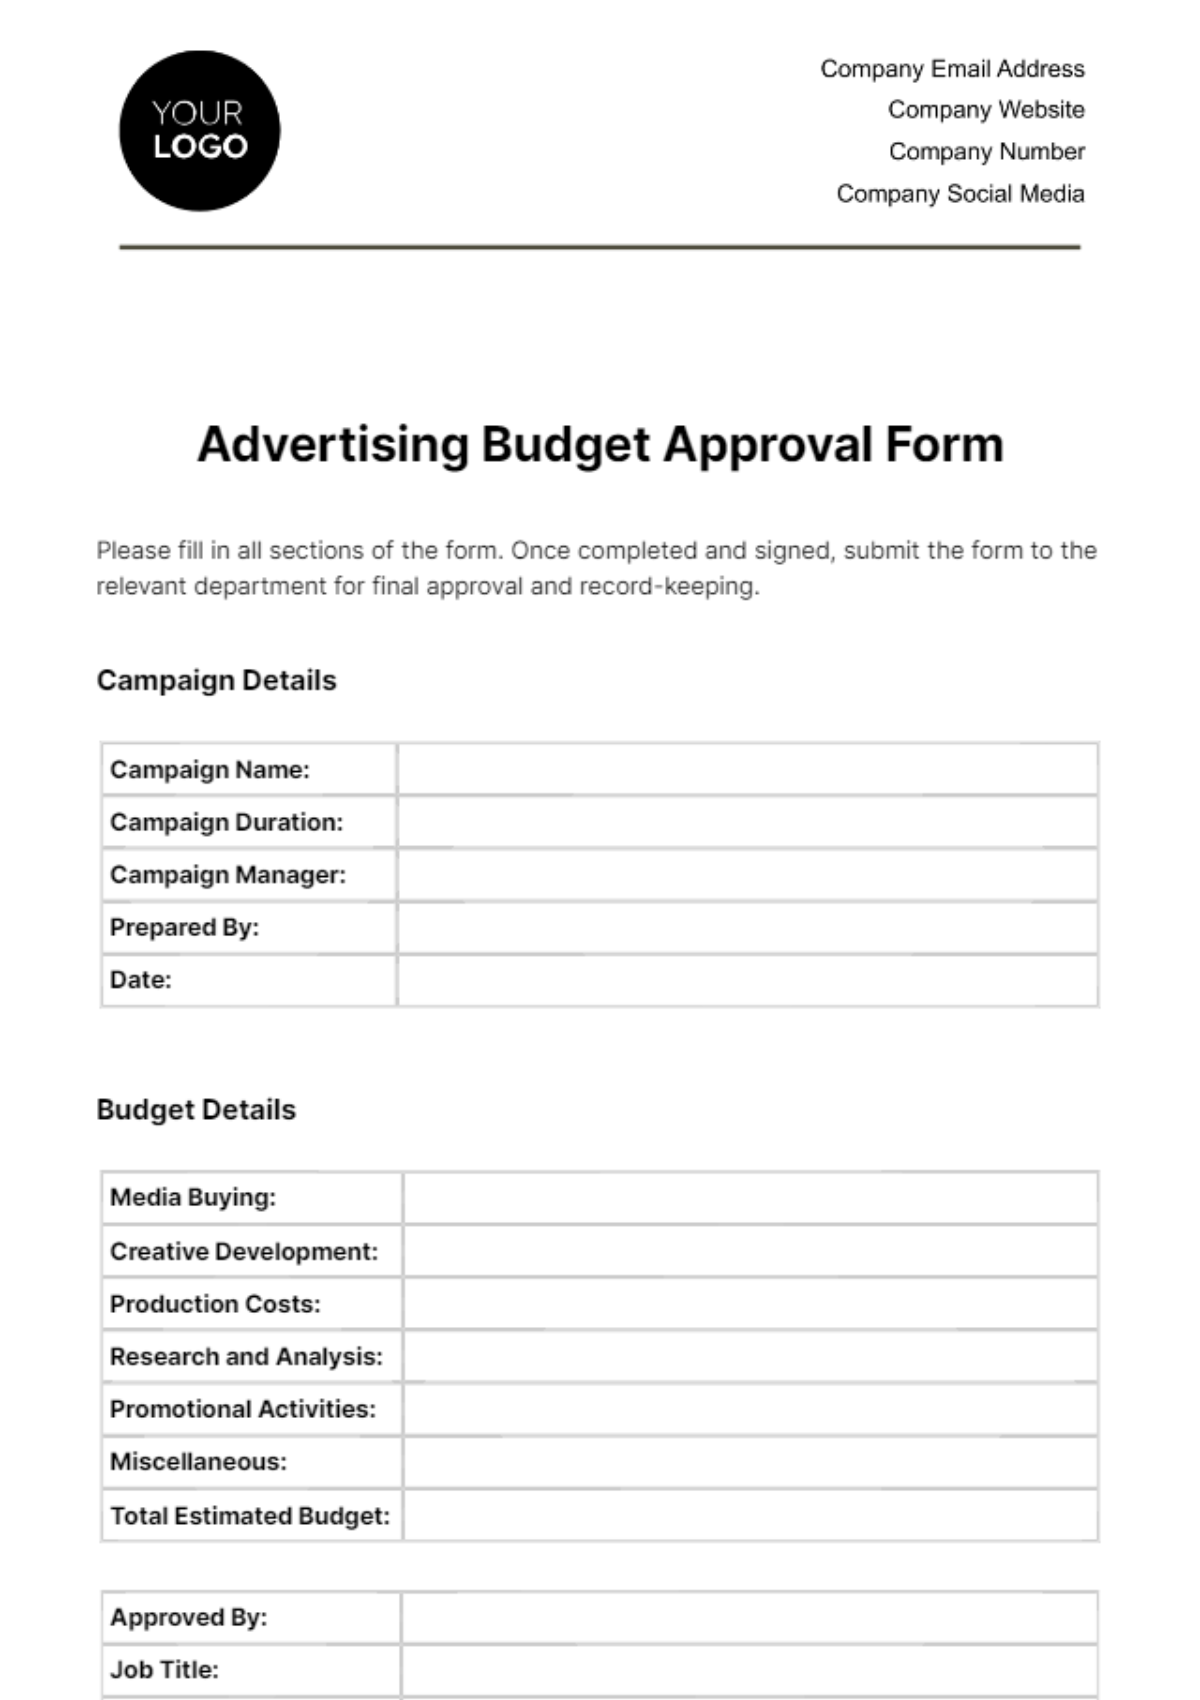 Advertising Budget Approval Form Template